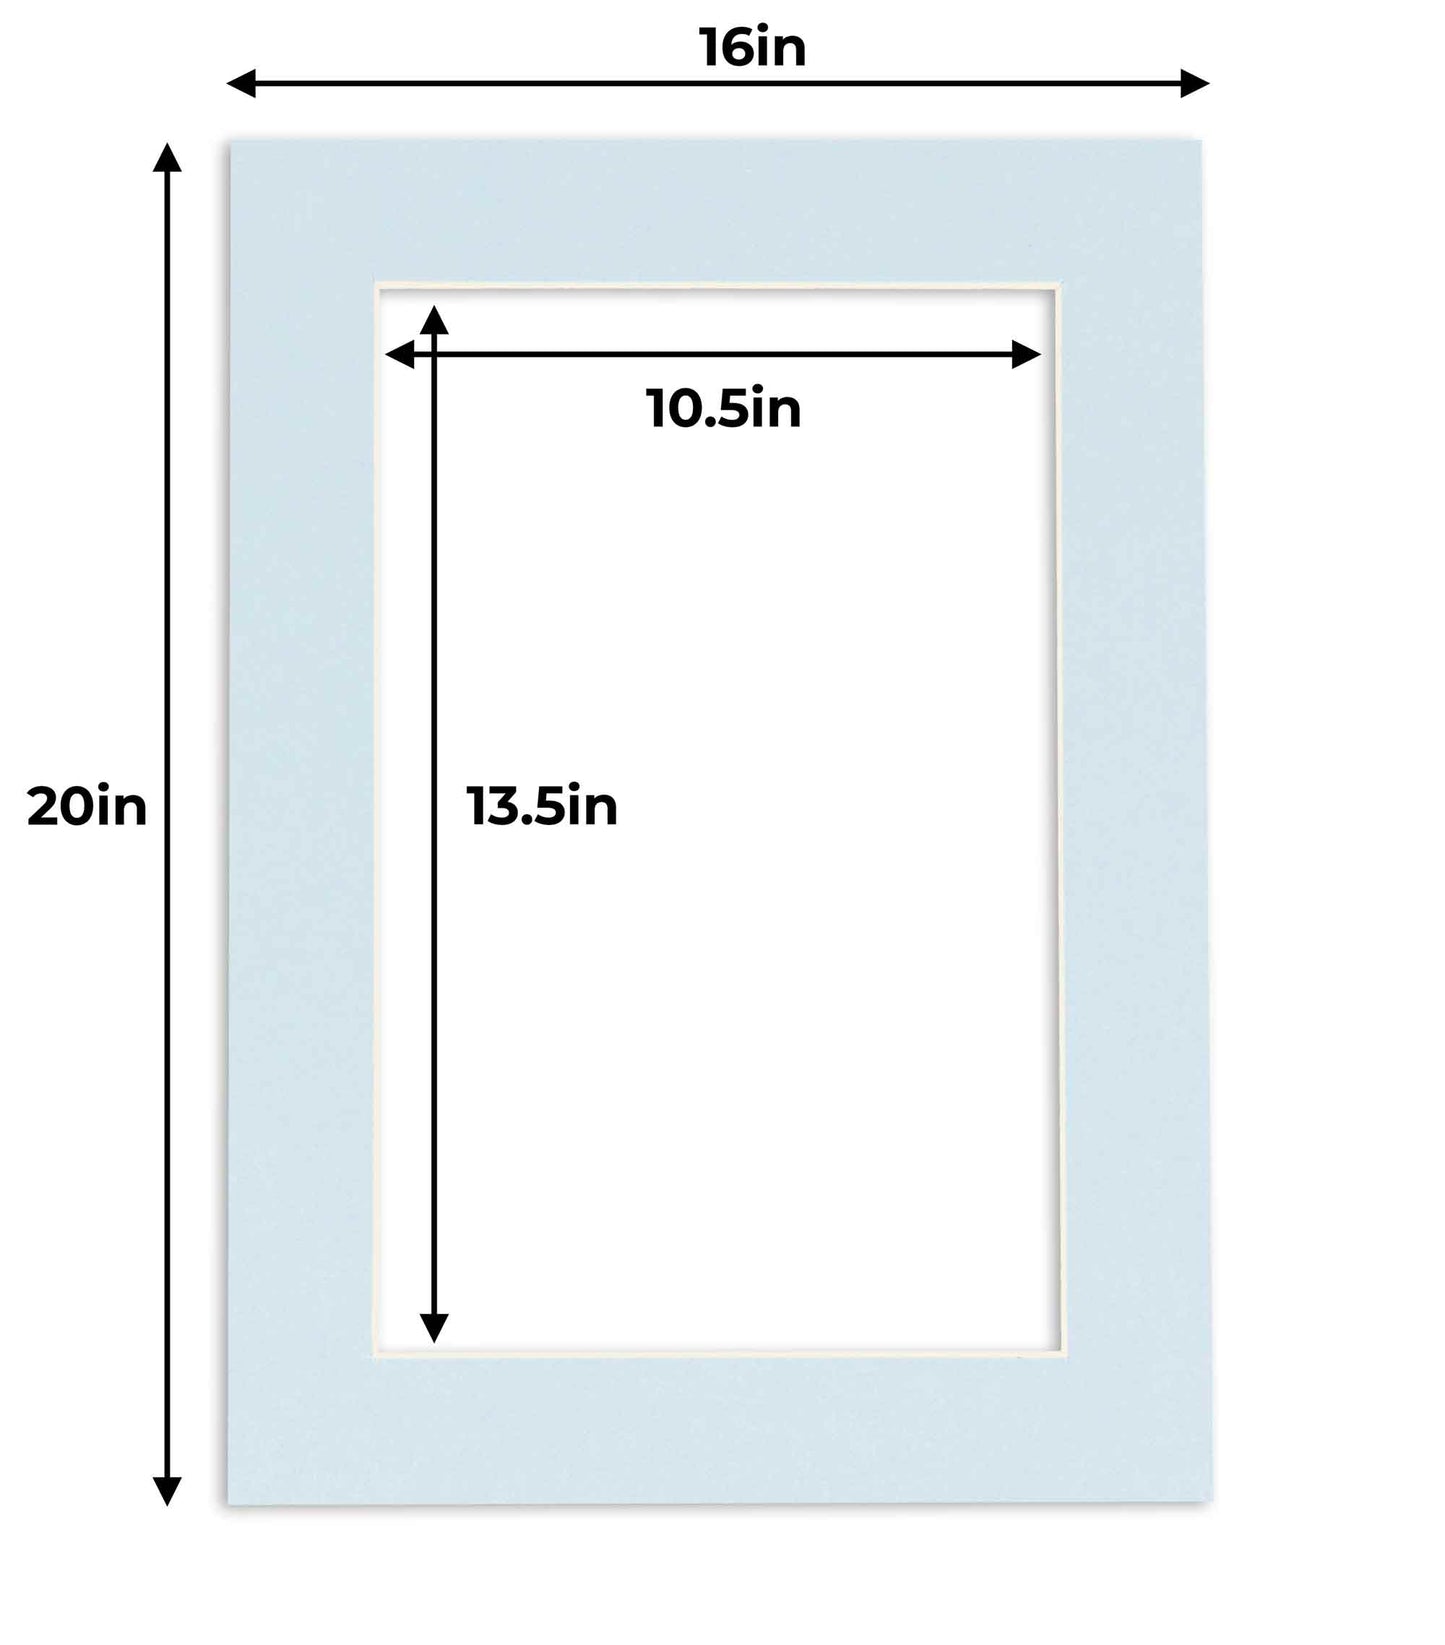 Pack of 10 Baby Blue Precut Acid-Free Matboard Set with Clear Bags & Backings